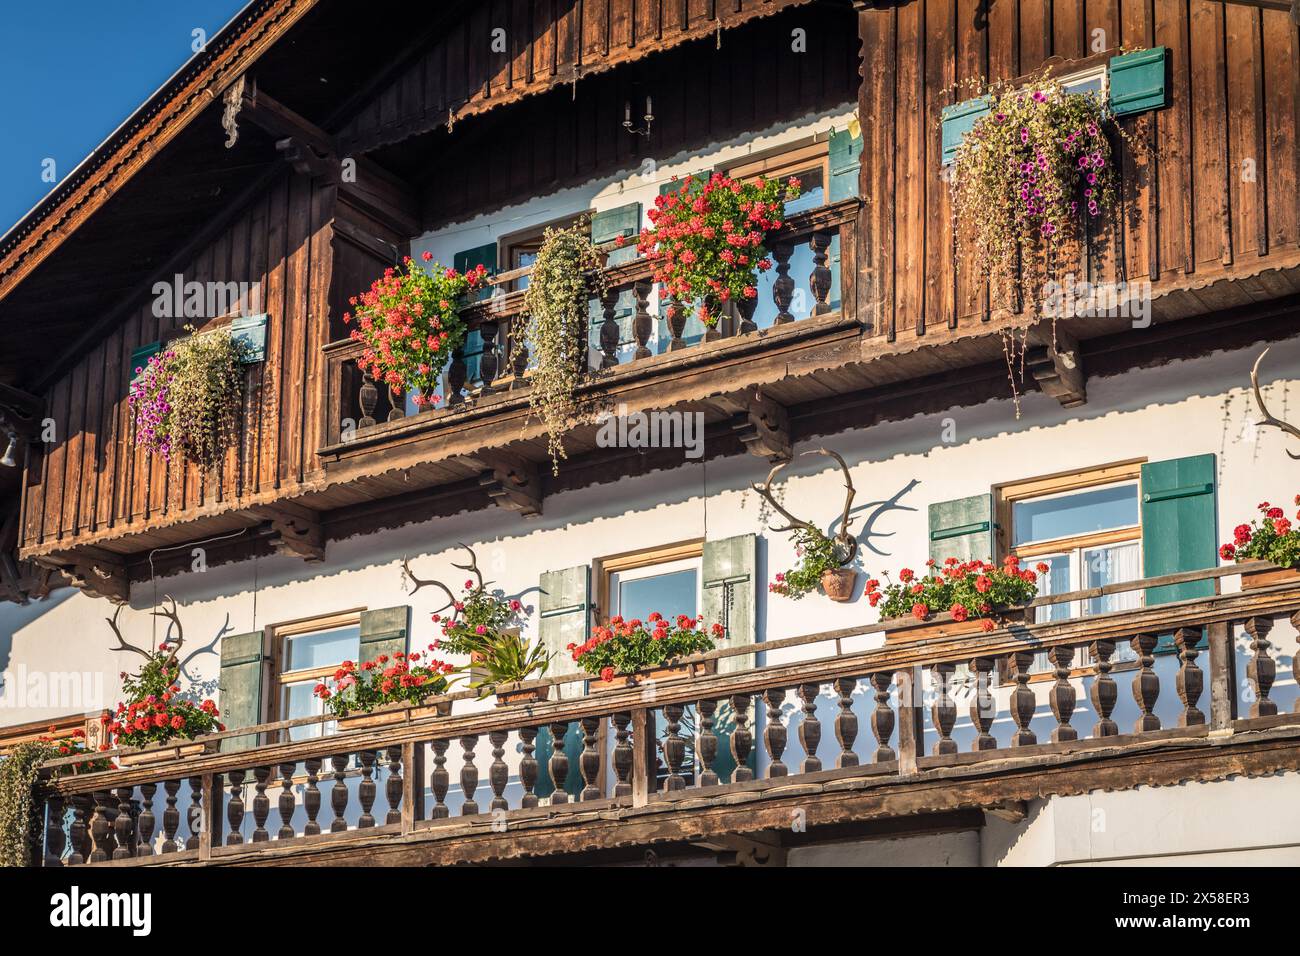 Geographie / Reise, Deutschland, Bayern, Schliersee (See), traditionelles Haus in Schliersee (See), ADDITIONAL-RIGHTS-CLEARANCE-INFO-NOT-AVAILABLE Stockfoto